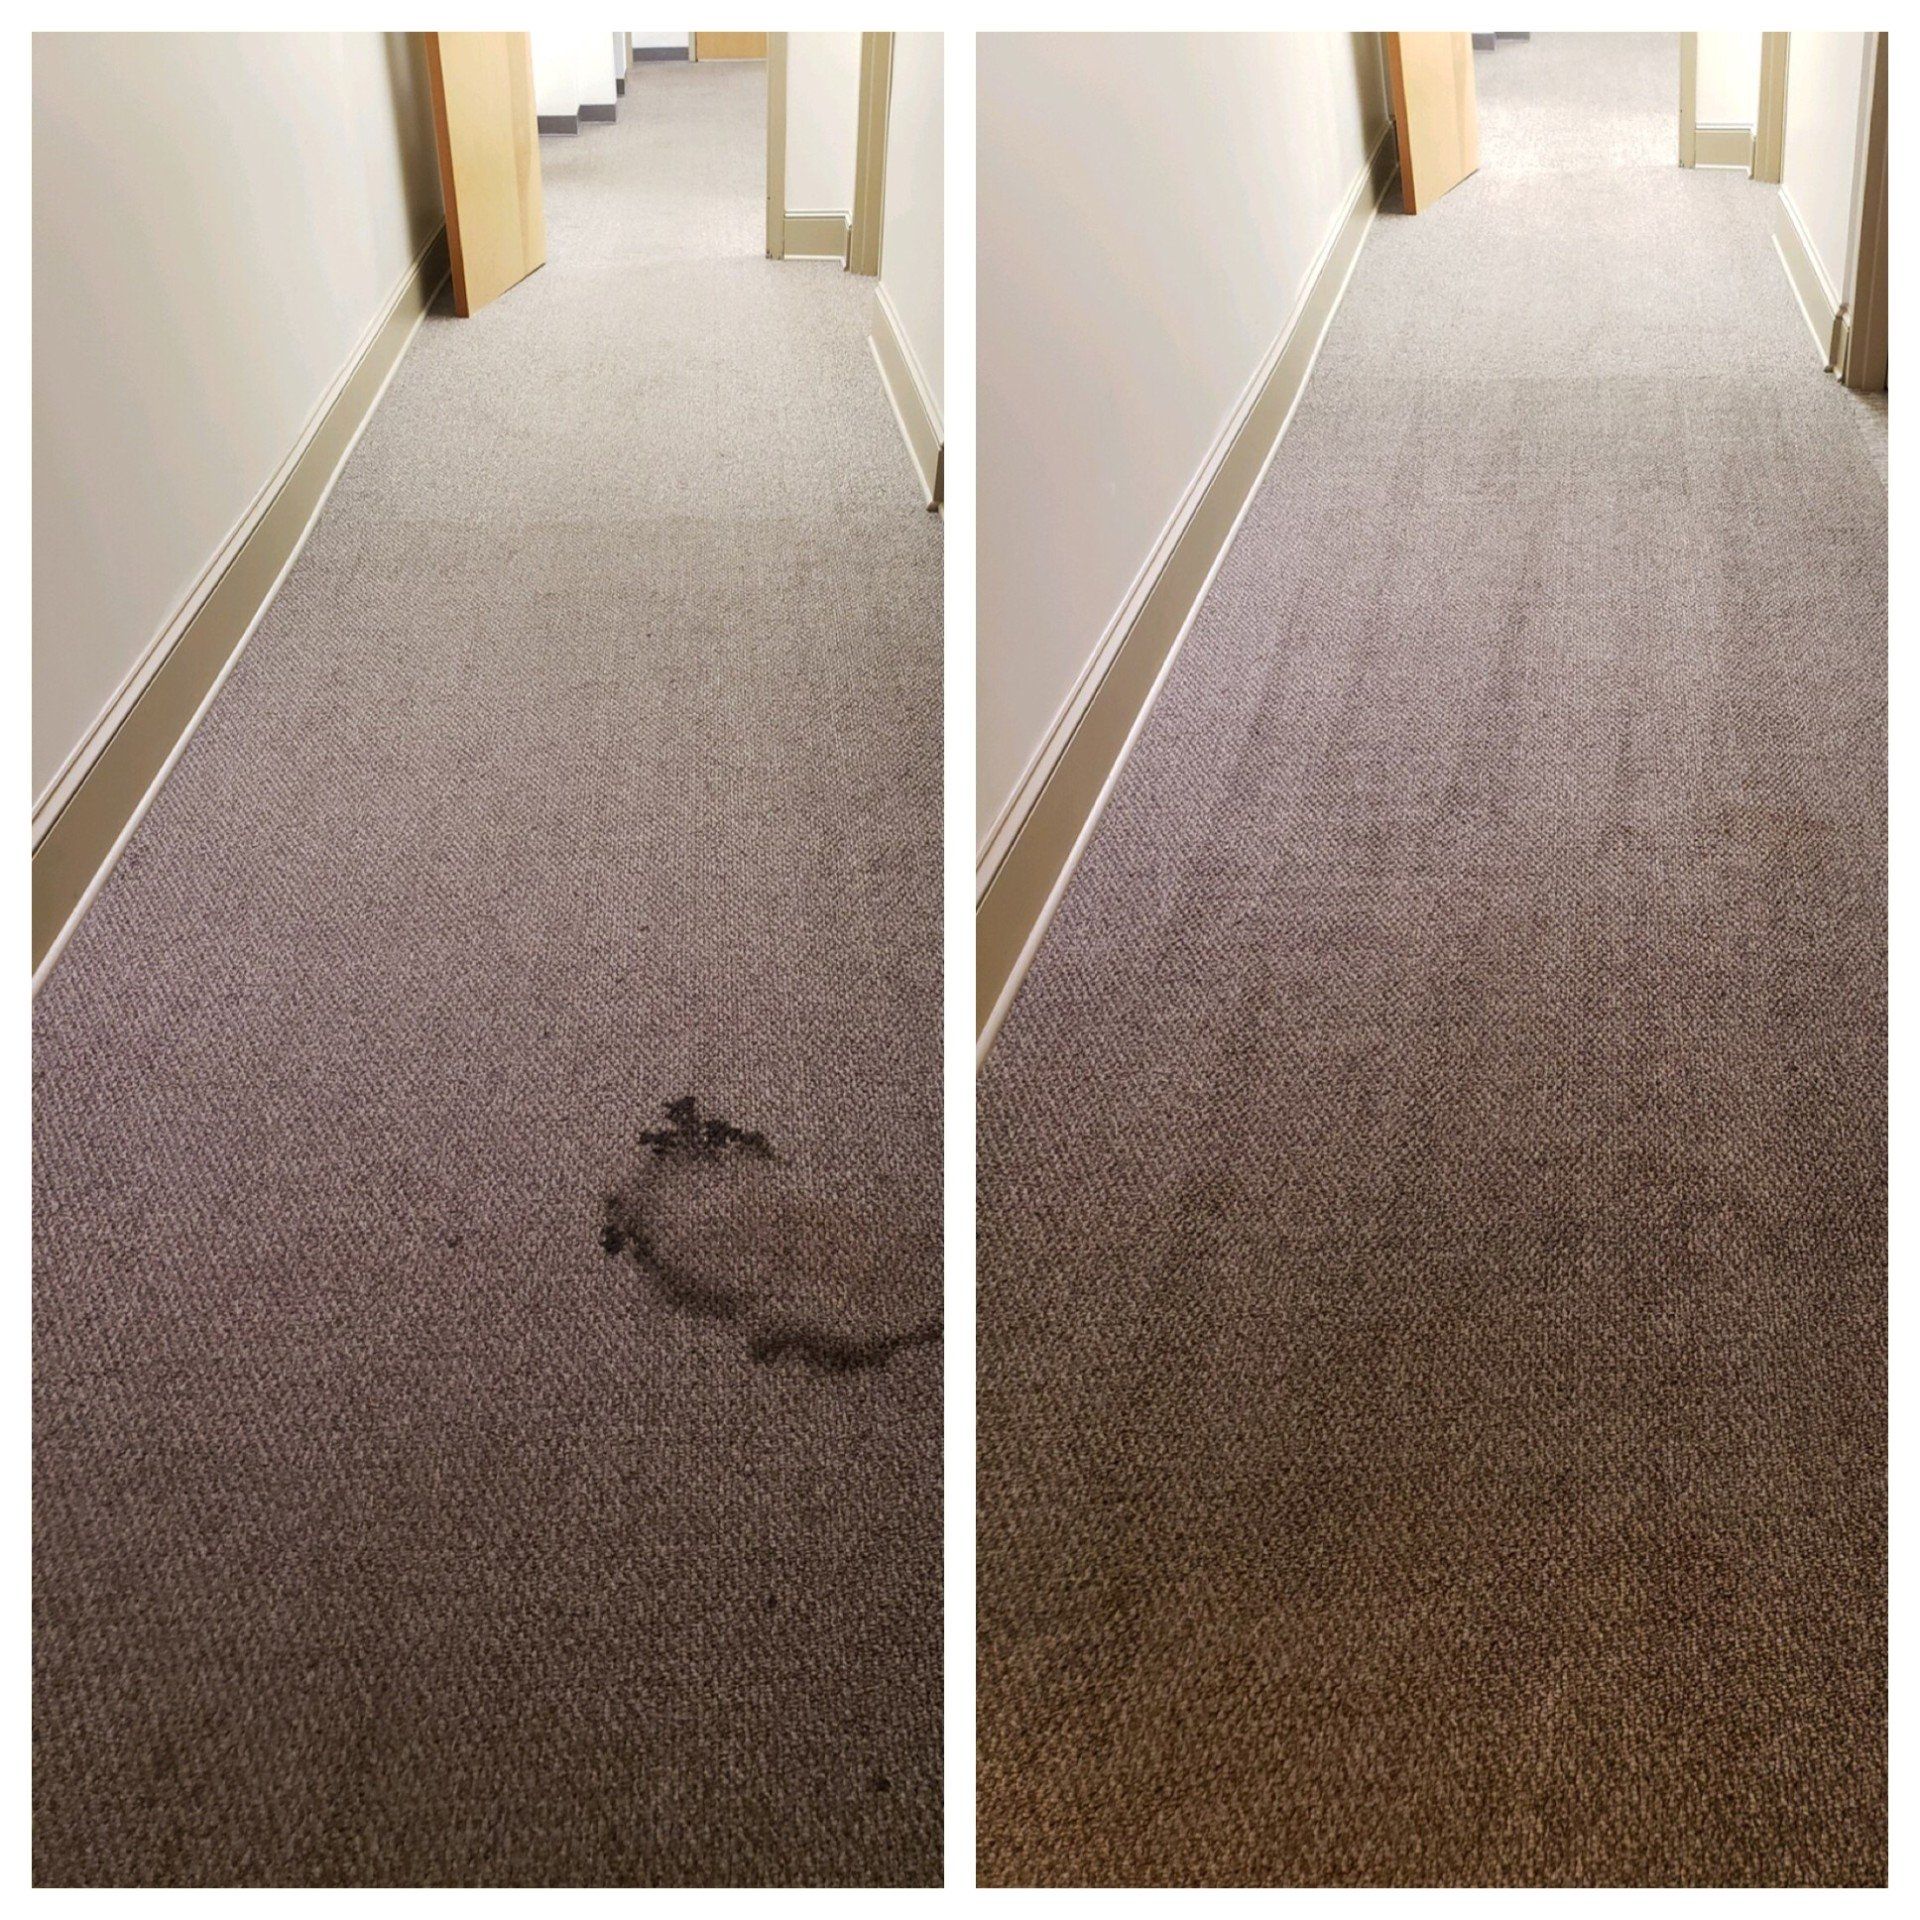 Office carpet cleaning coffee stain Raleigh, Durham, Chapel Hill